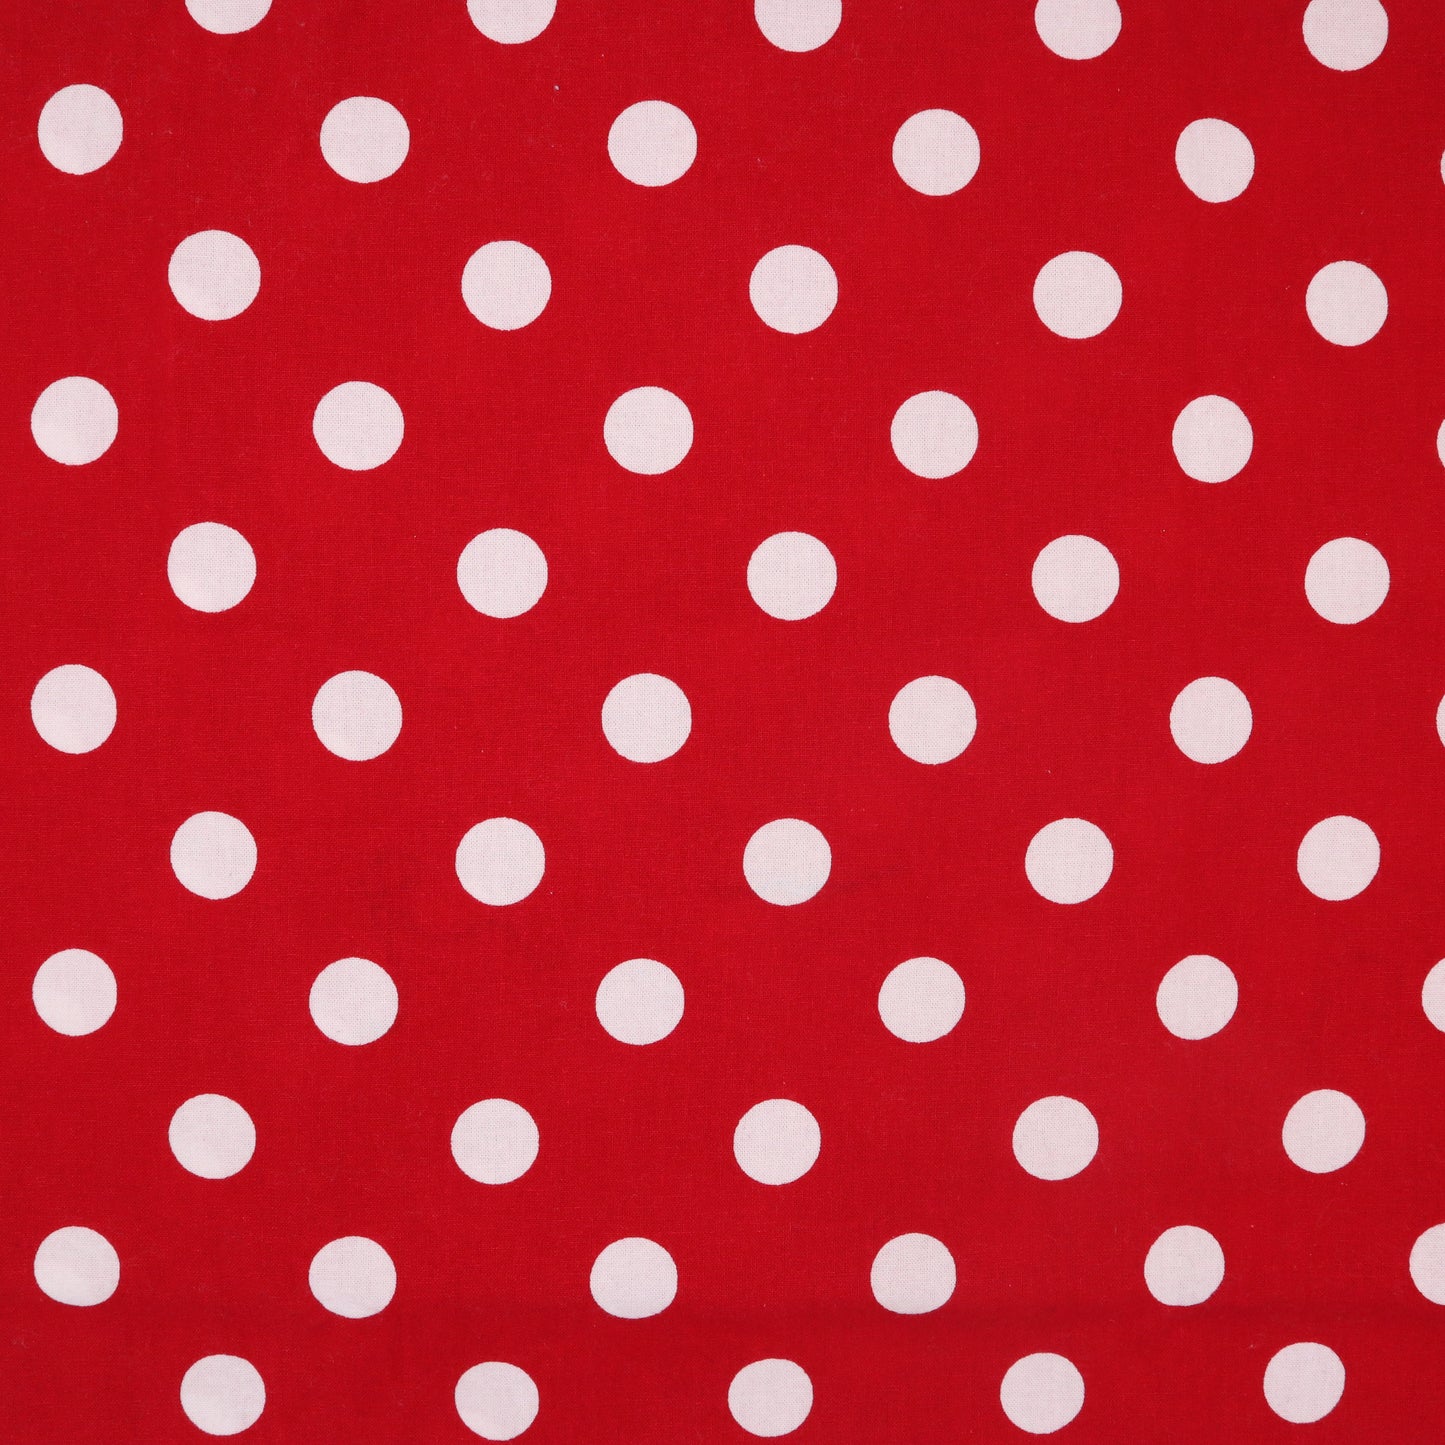 Big Polka Dots on Red - Quilting Cotton